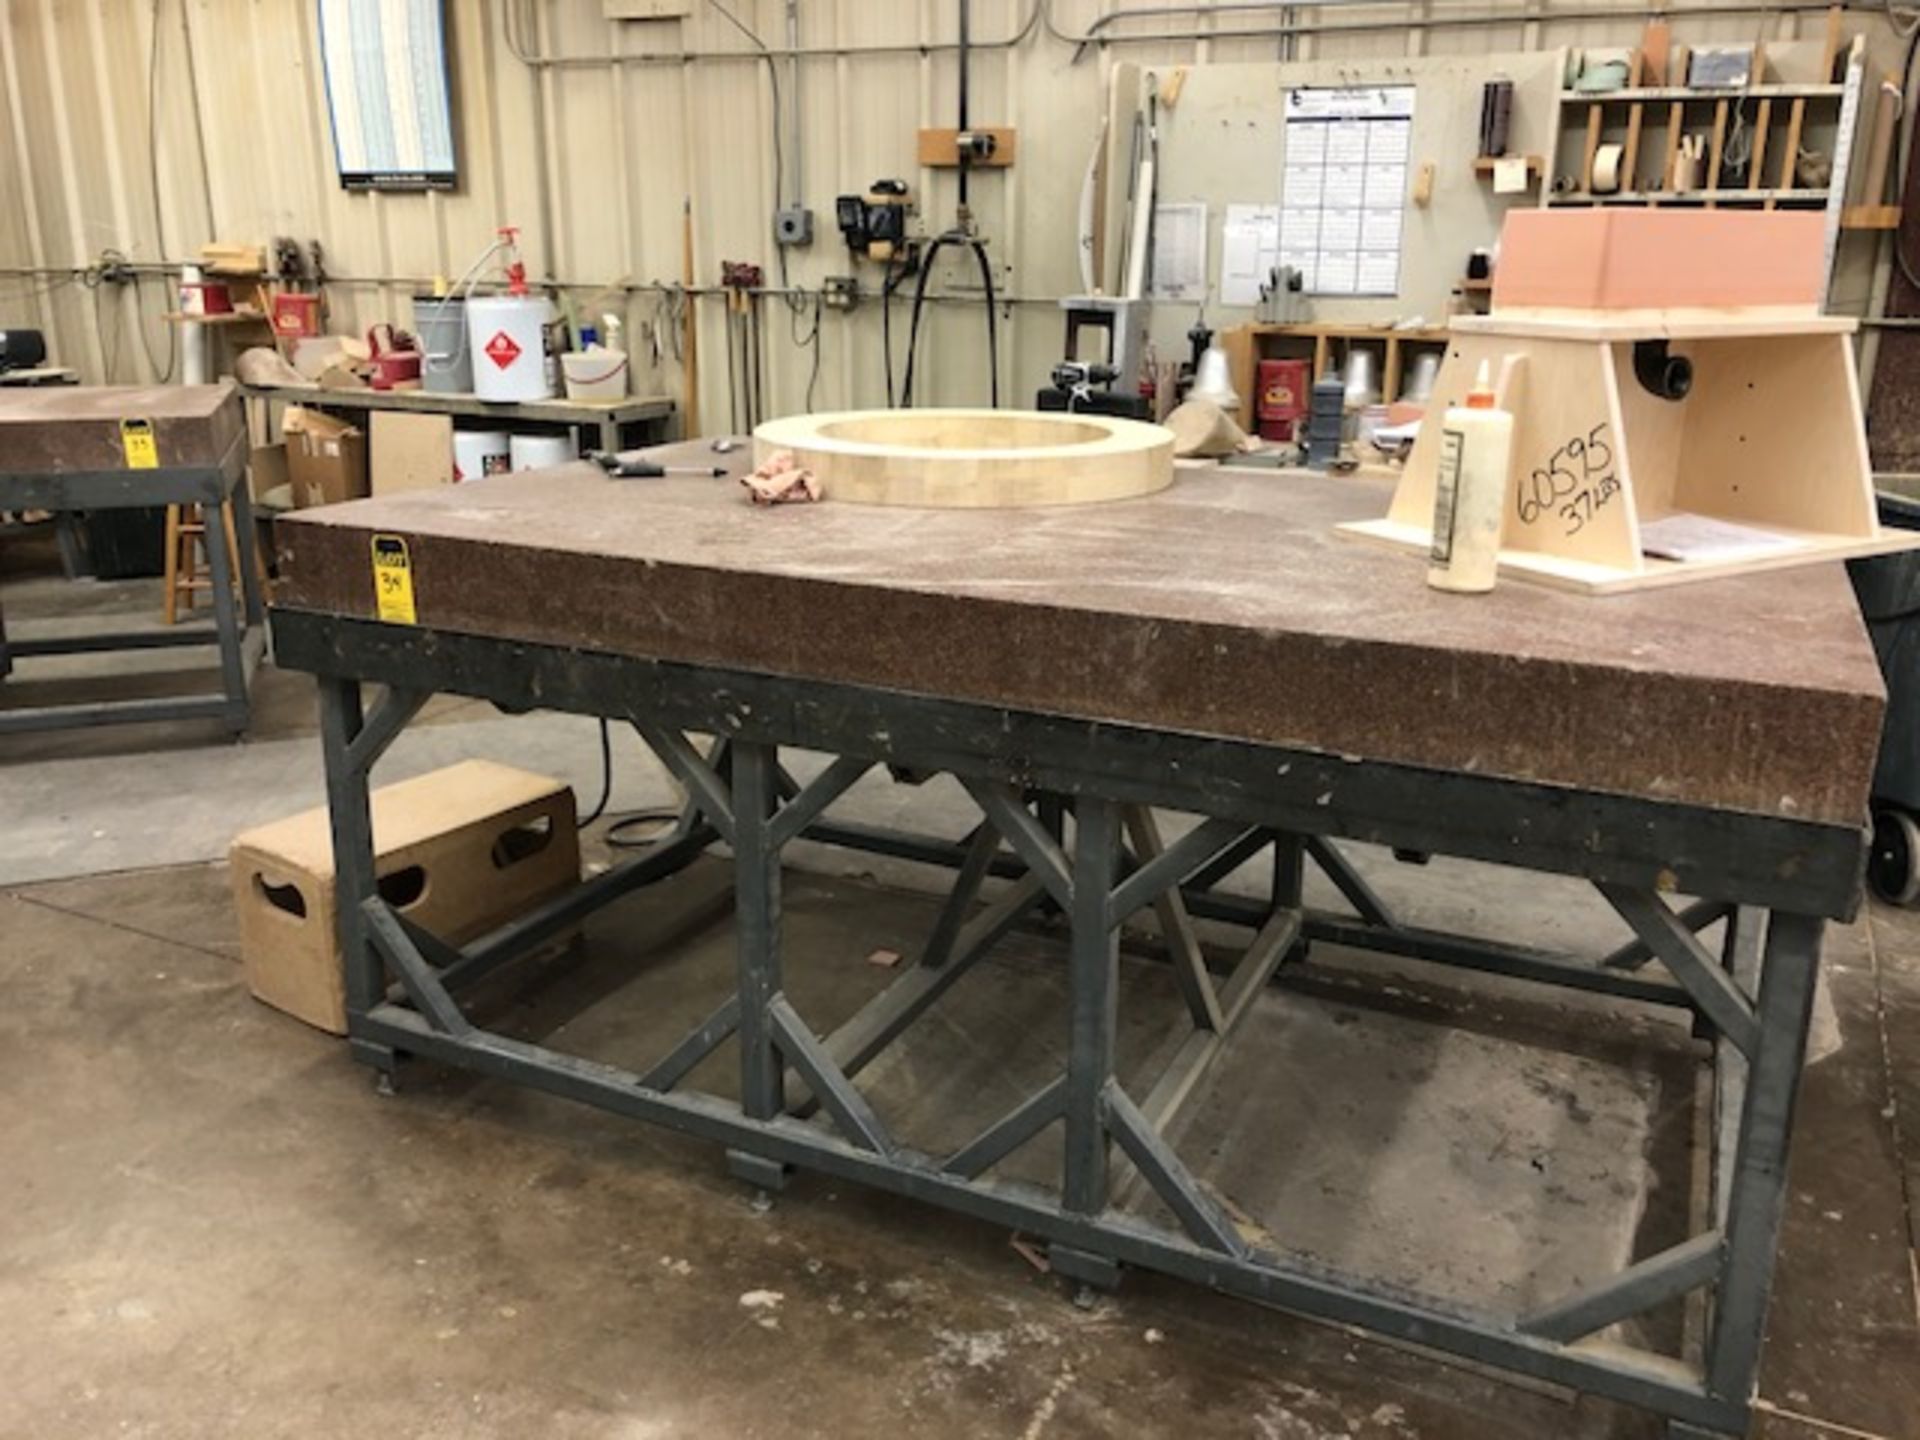 48" x 84" granite surface plate with stand - removal available October 26, 2018